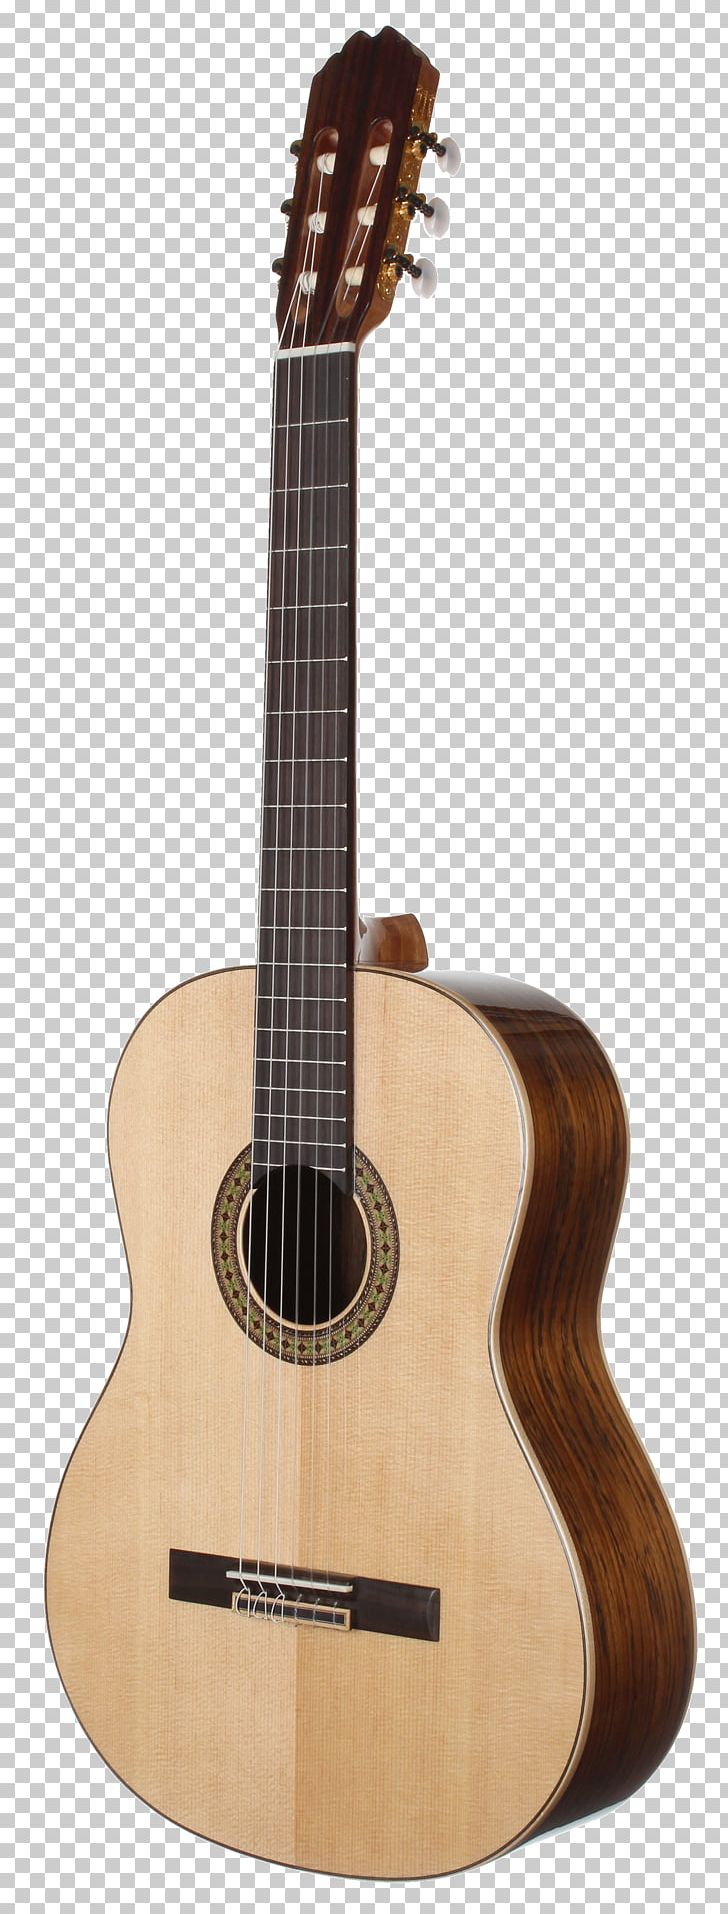 Acoustic Guitar Yamaha Corporation Dreadnought Yamaha FG830 PNG, Clipart, Acoustic Electric Guitar, Cuatro, Guitar Accessory, Musical, Plucked String Instruments Free PNG Download